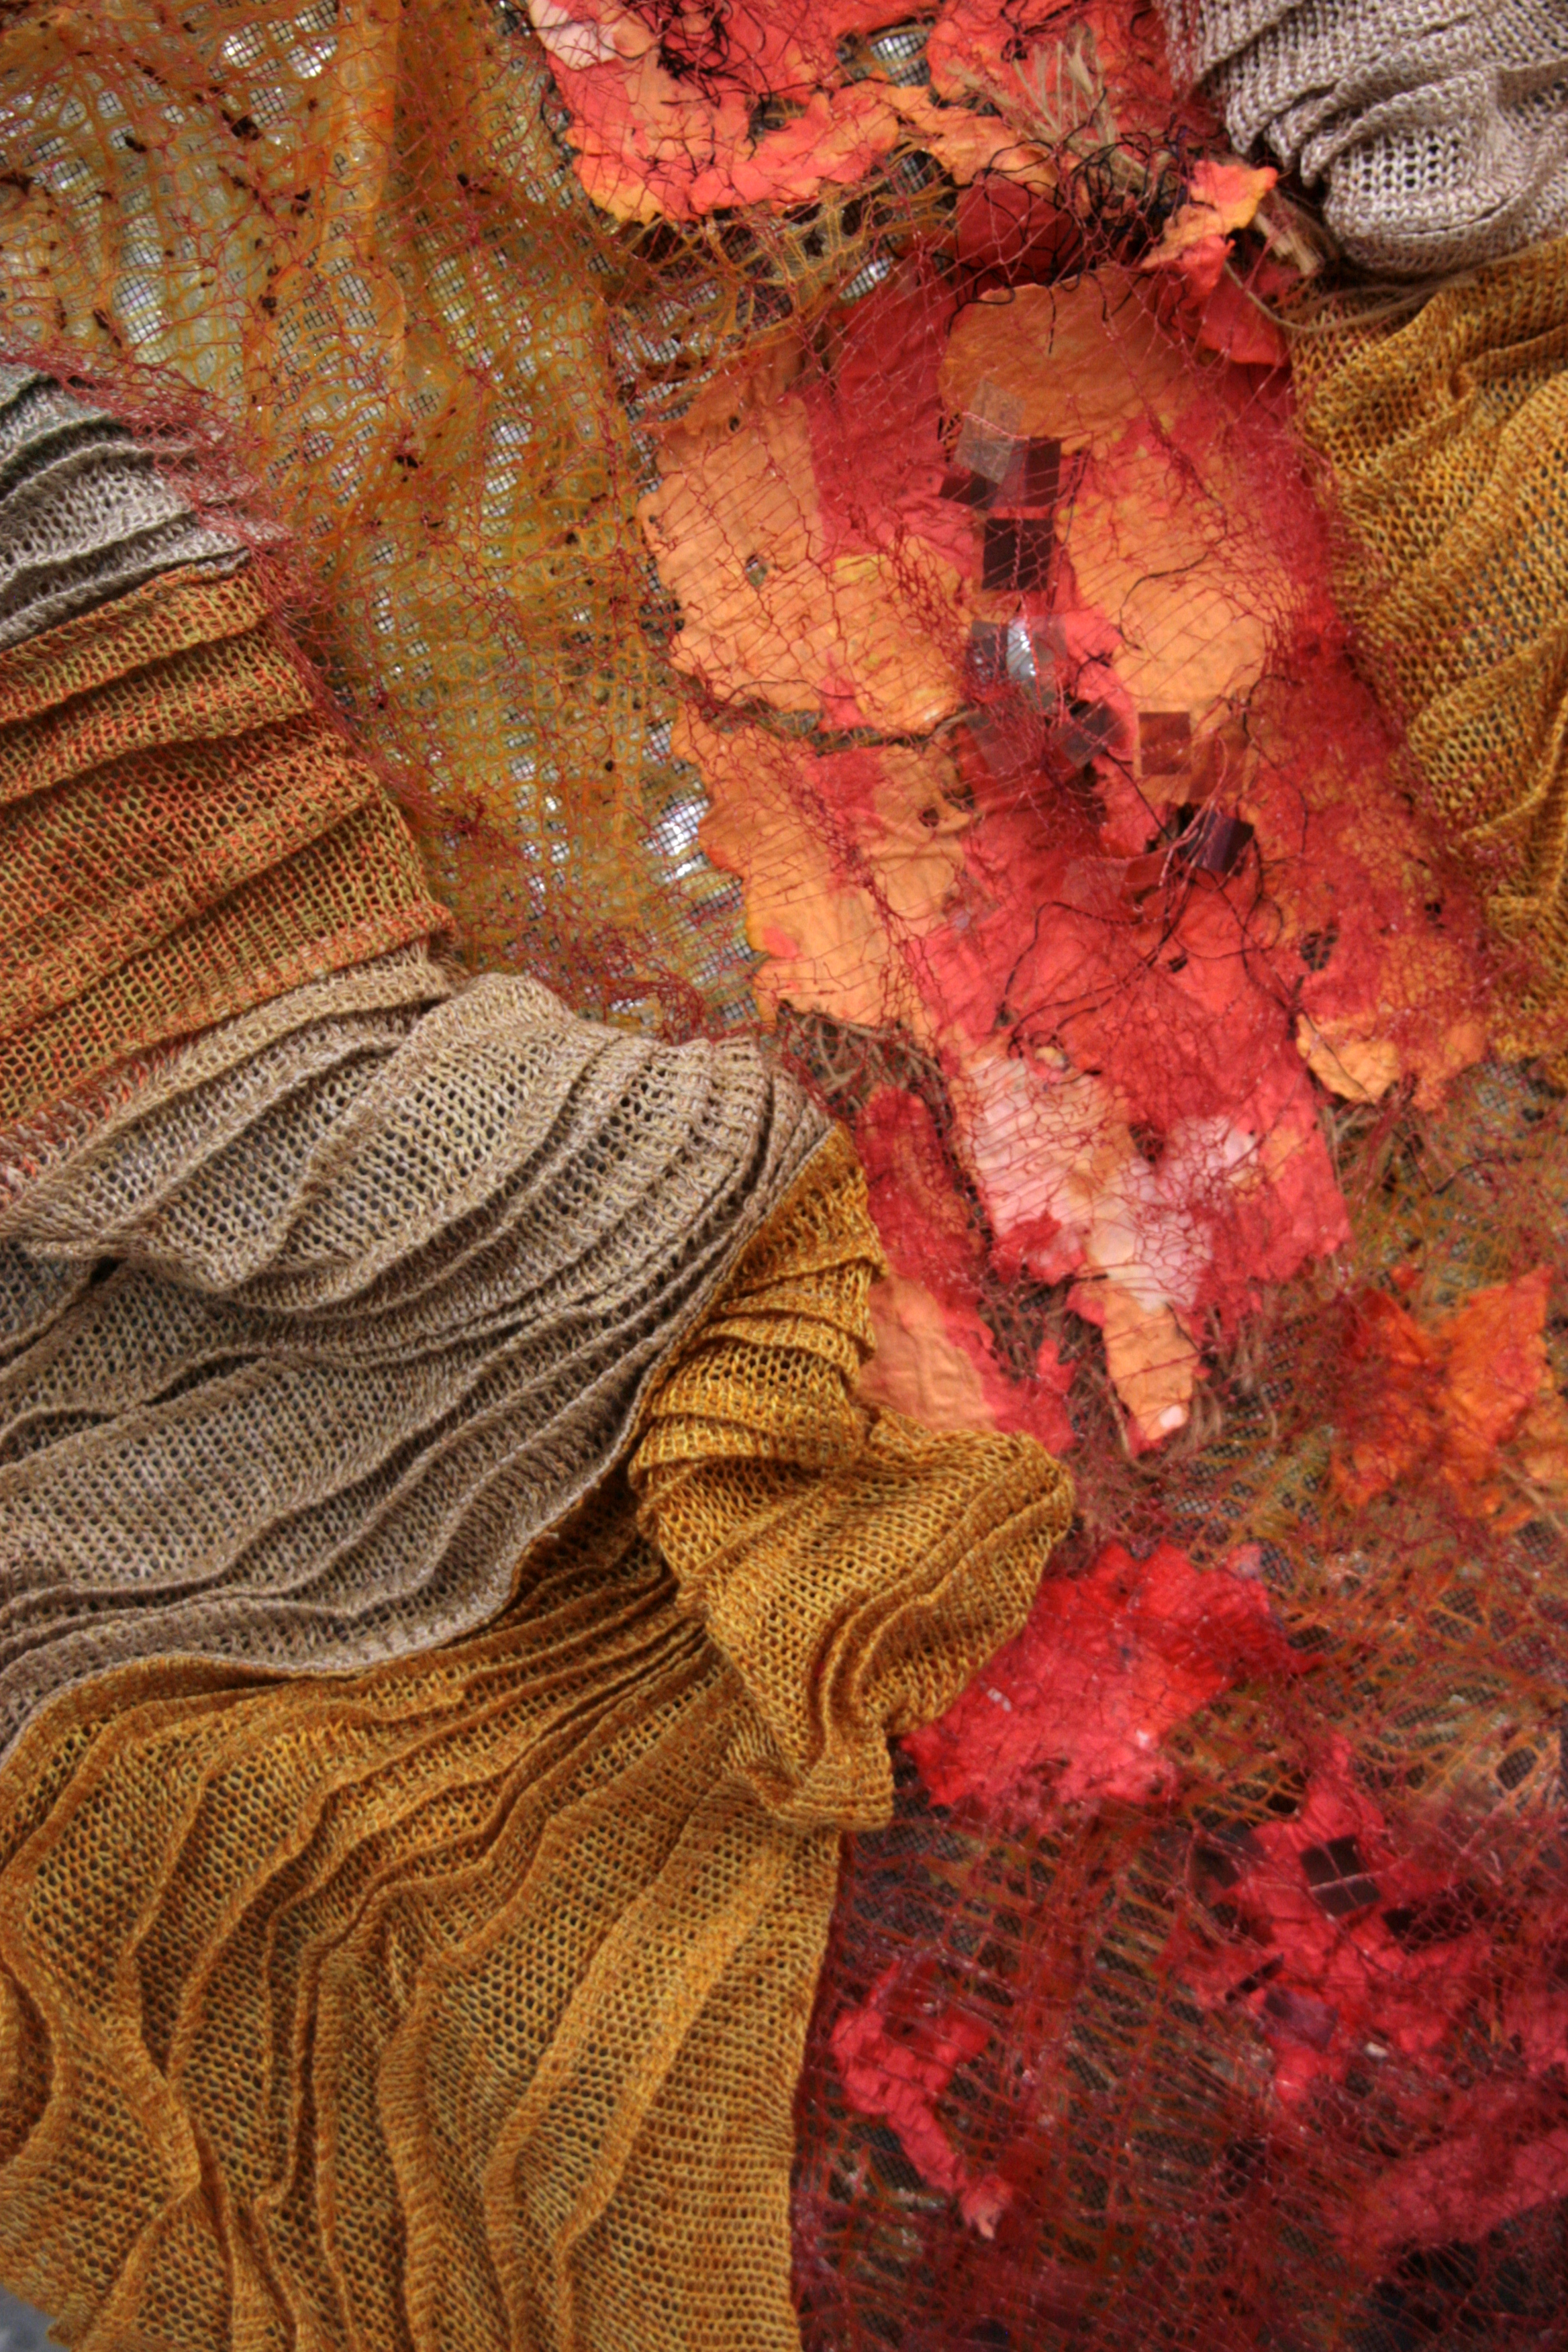  Patricia Rose,  Journey of Connection , 2015, mixed media: scientific wire, silk, wool, threads, paper, transparencies, 151 x 92 x 10cm.&nbsp;Photograph courtesy the artist. 